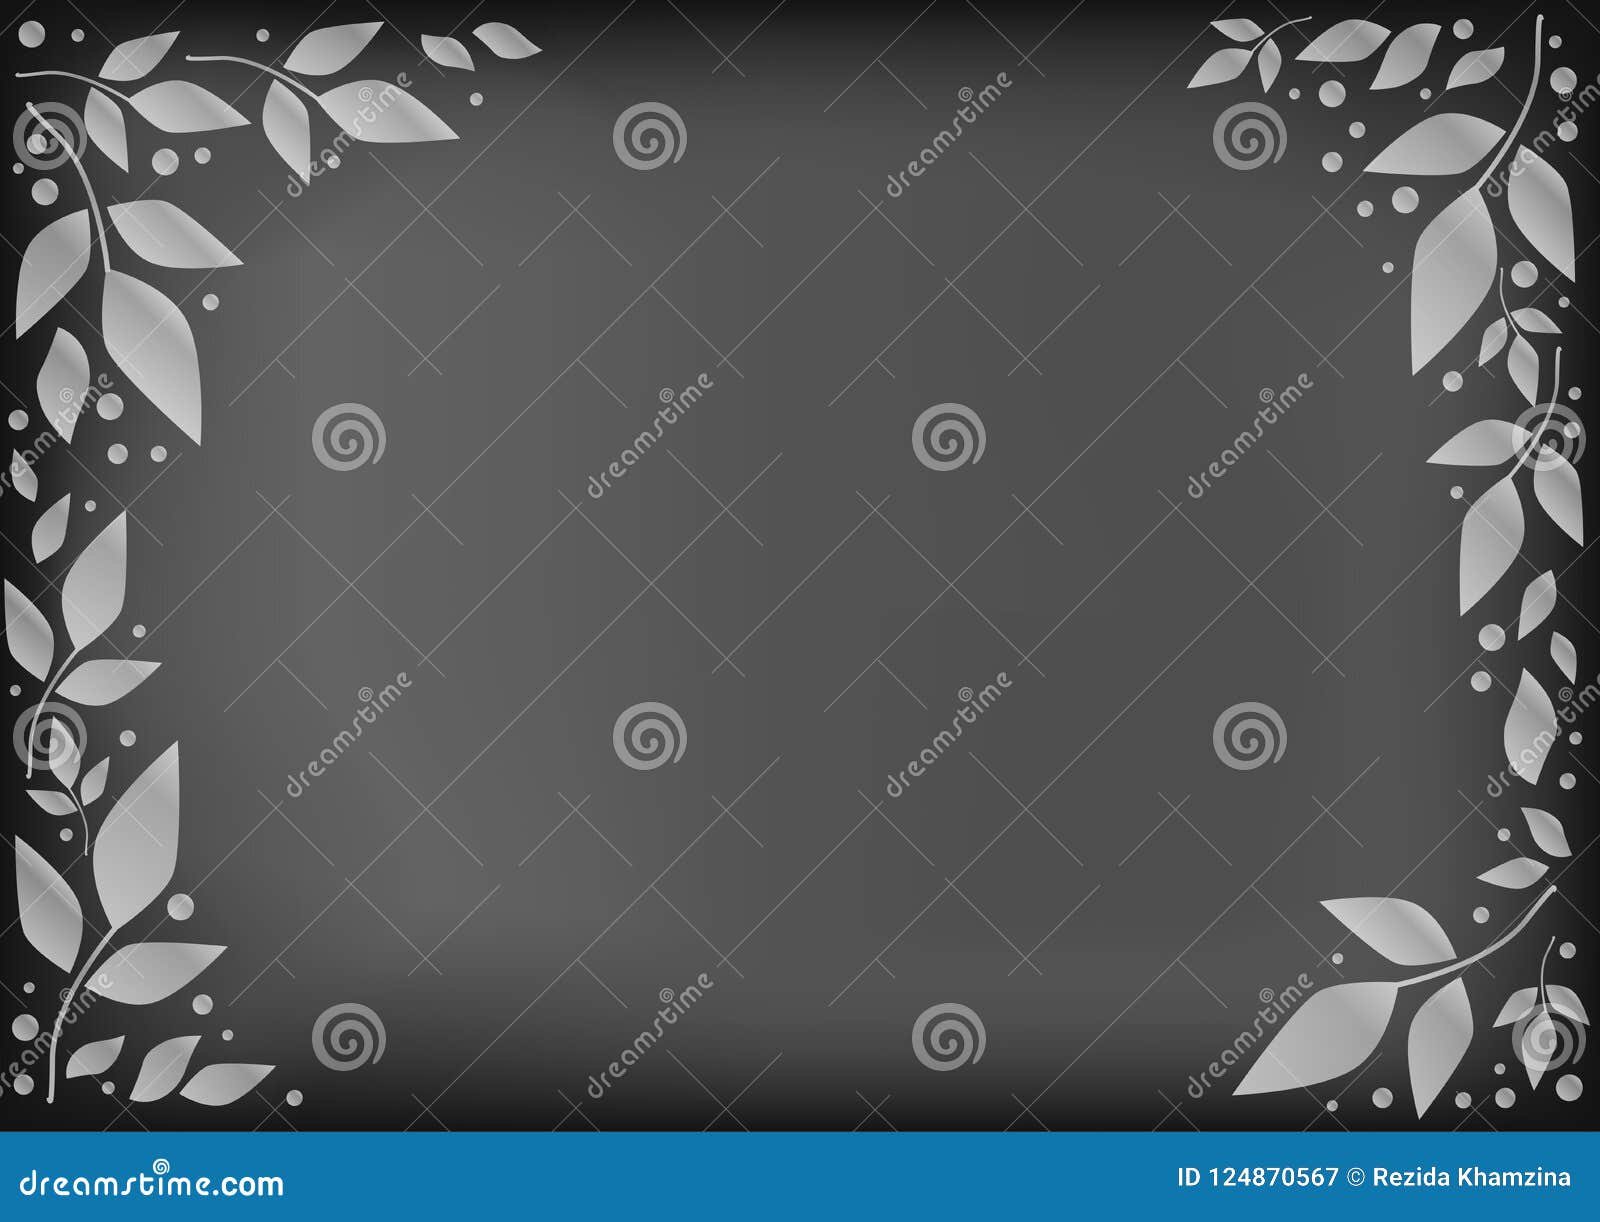 Chalkboard Background With Decorative Frame Of White Leaves And